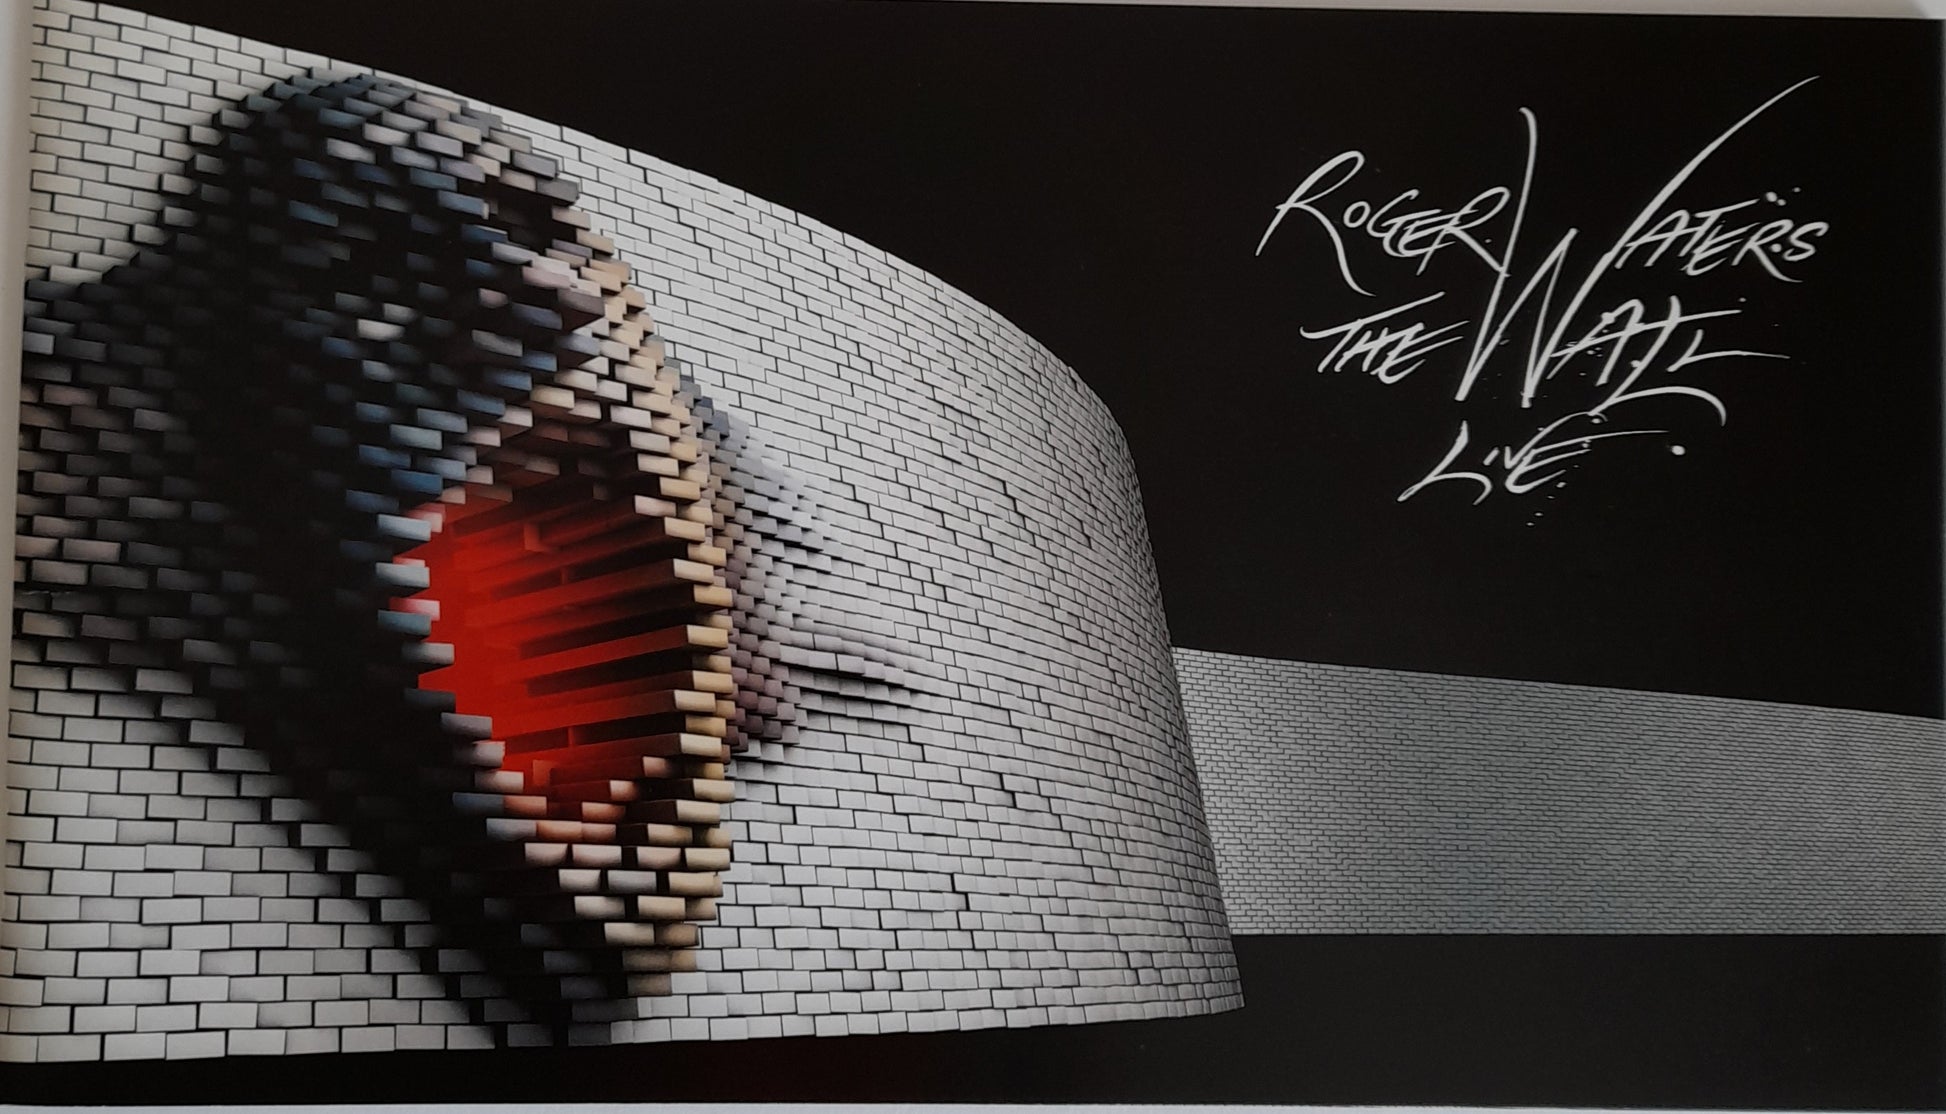 Roger Waters The Wall Live Book Programme Pink Floyd 2012